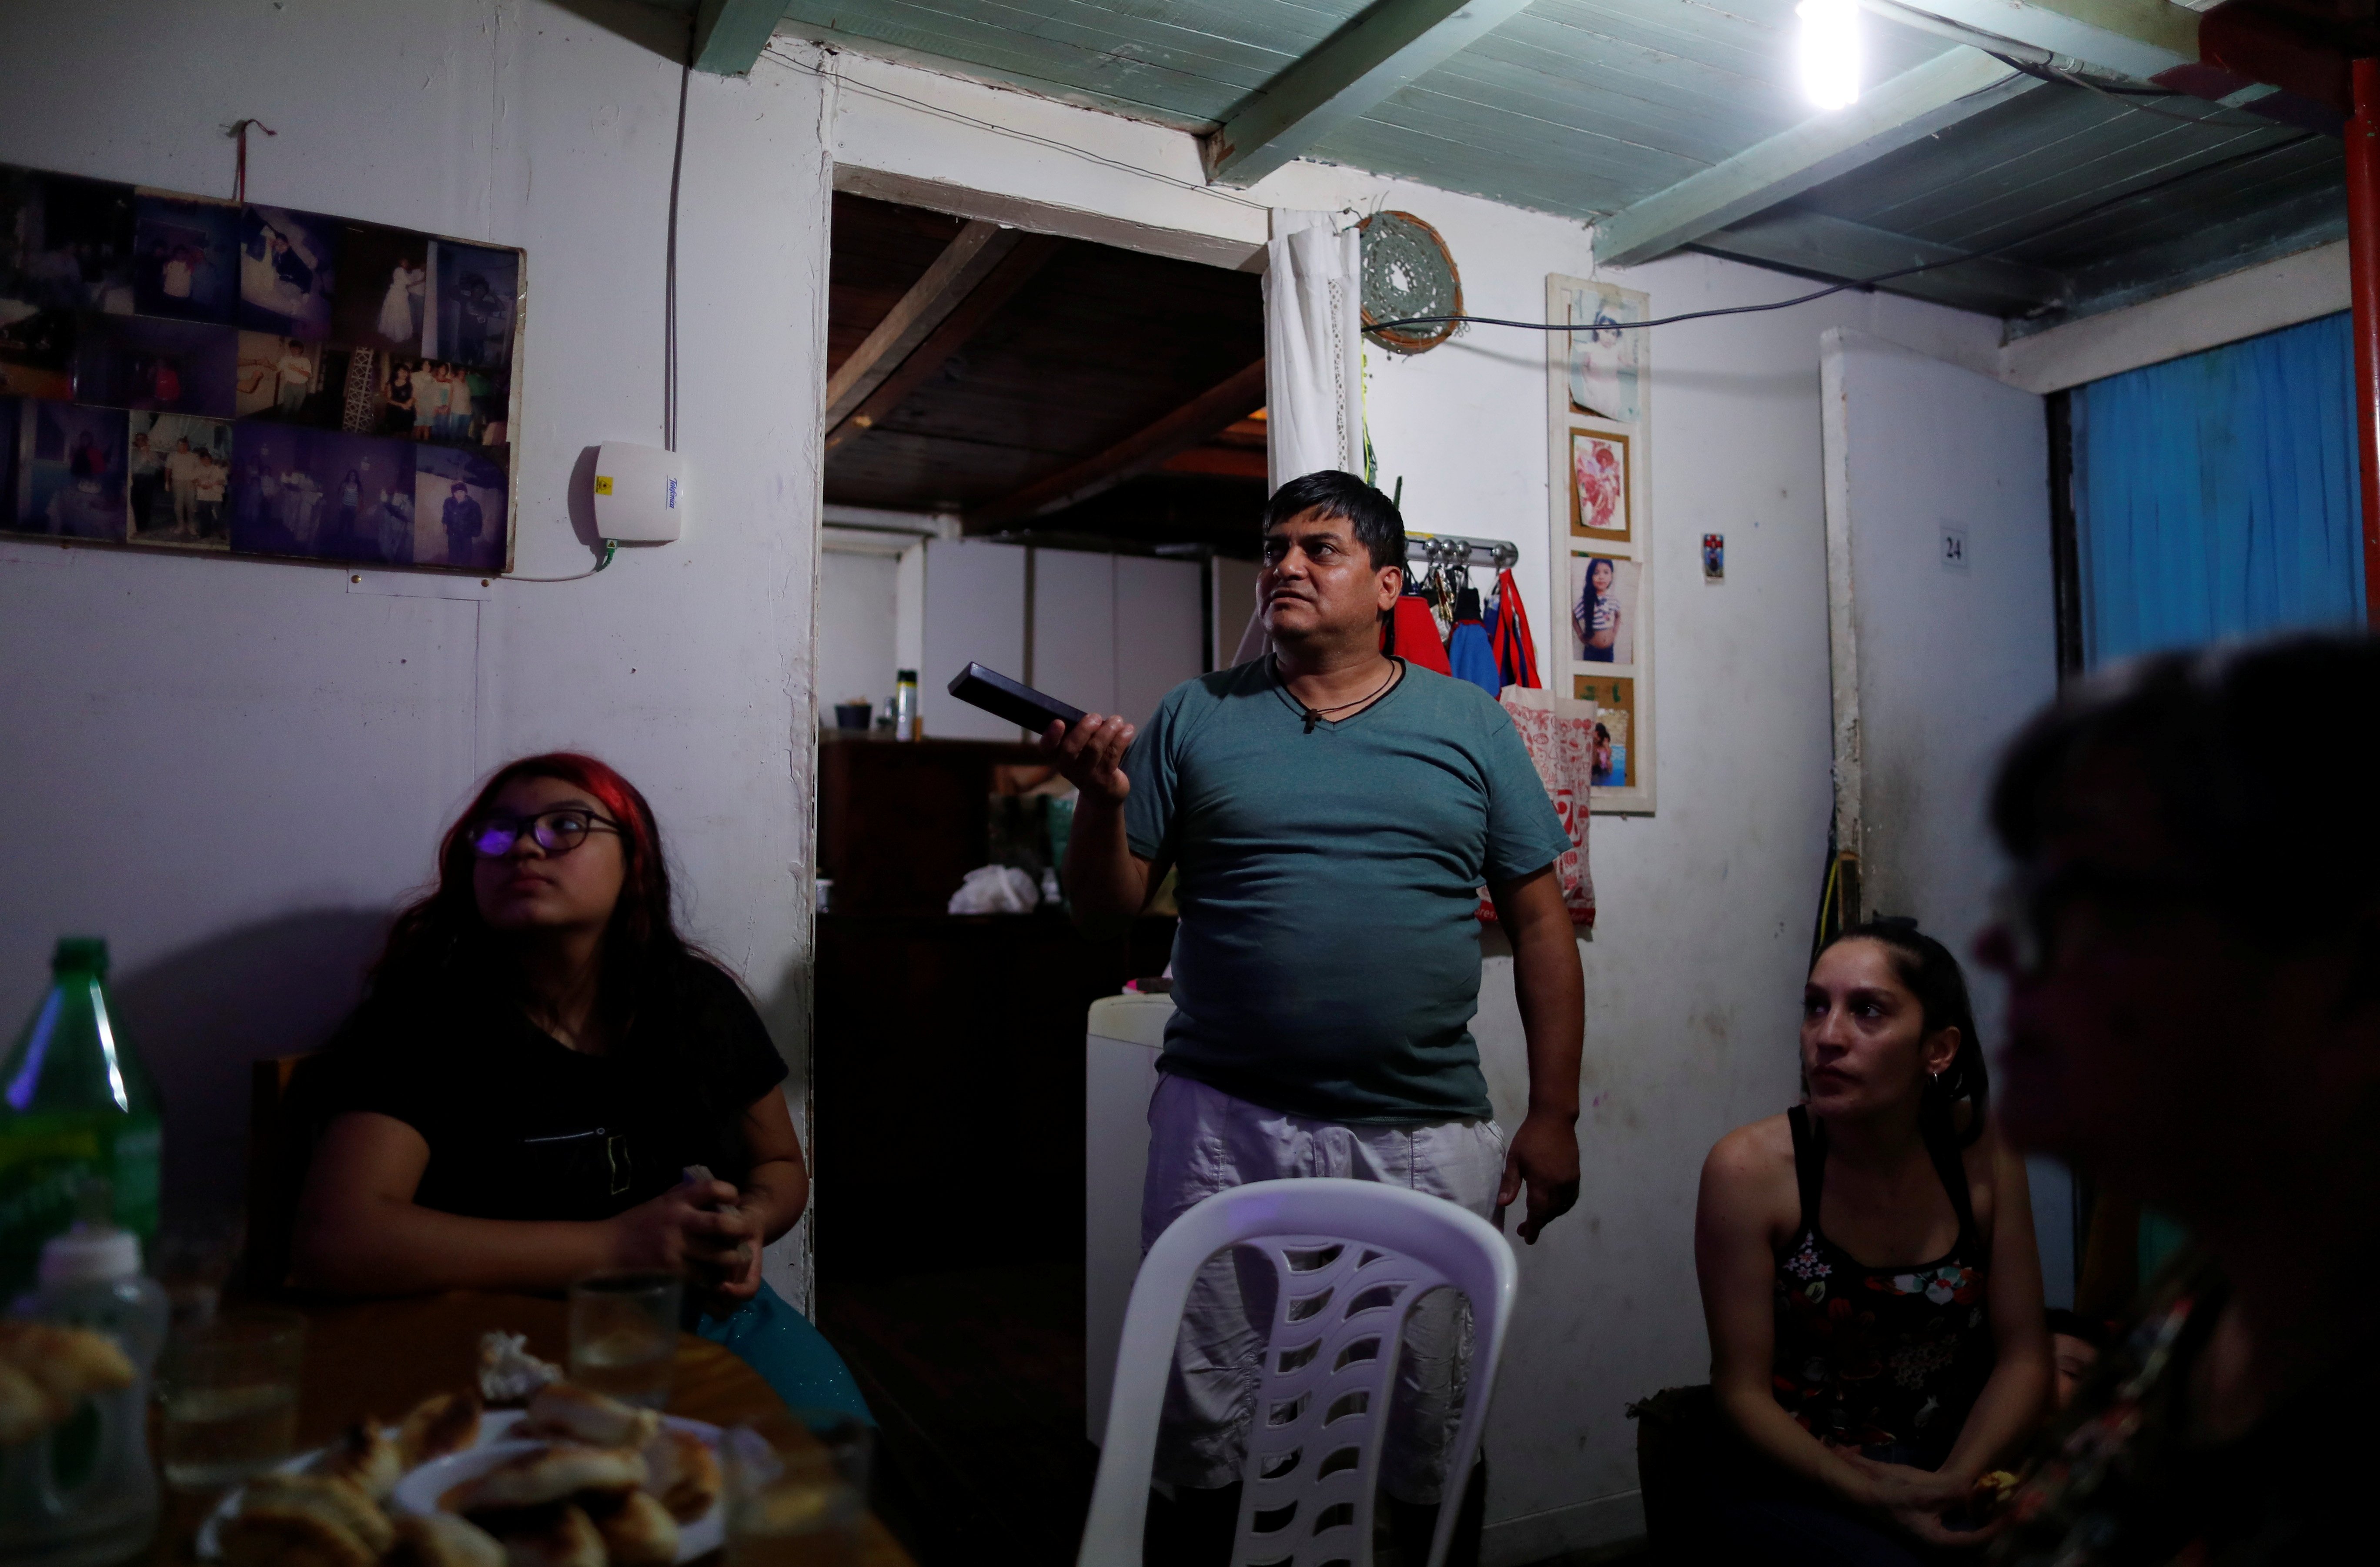 Gustavo Delgado, 52, who lost his job during the COVID-19 outbreak, celebrates his daughter's 12th birthday at home in Buenos Aires, Argentina, in this Nov. 17, 2020. (CNS photo/Agustin Marcarian, Reuters)